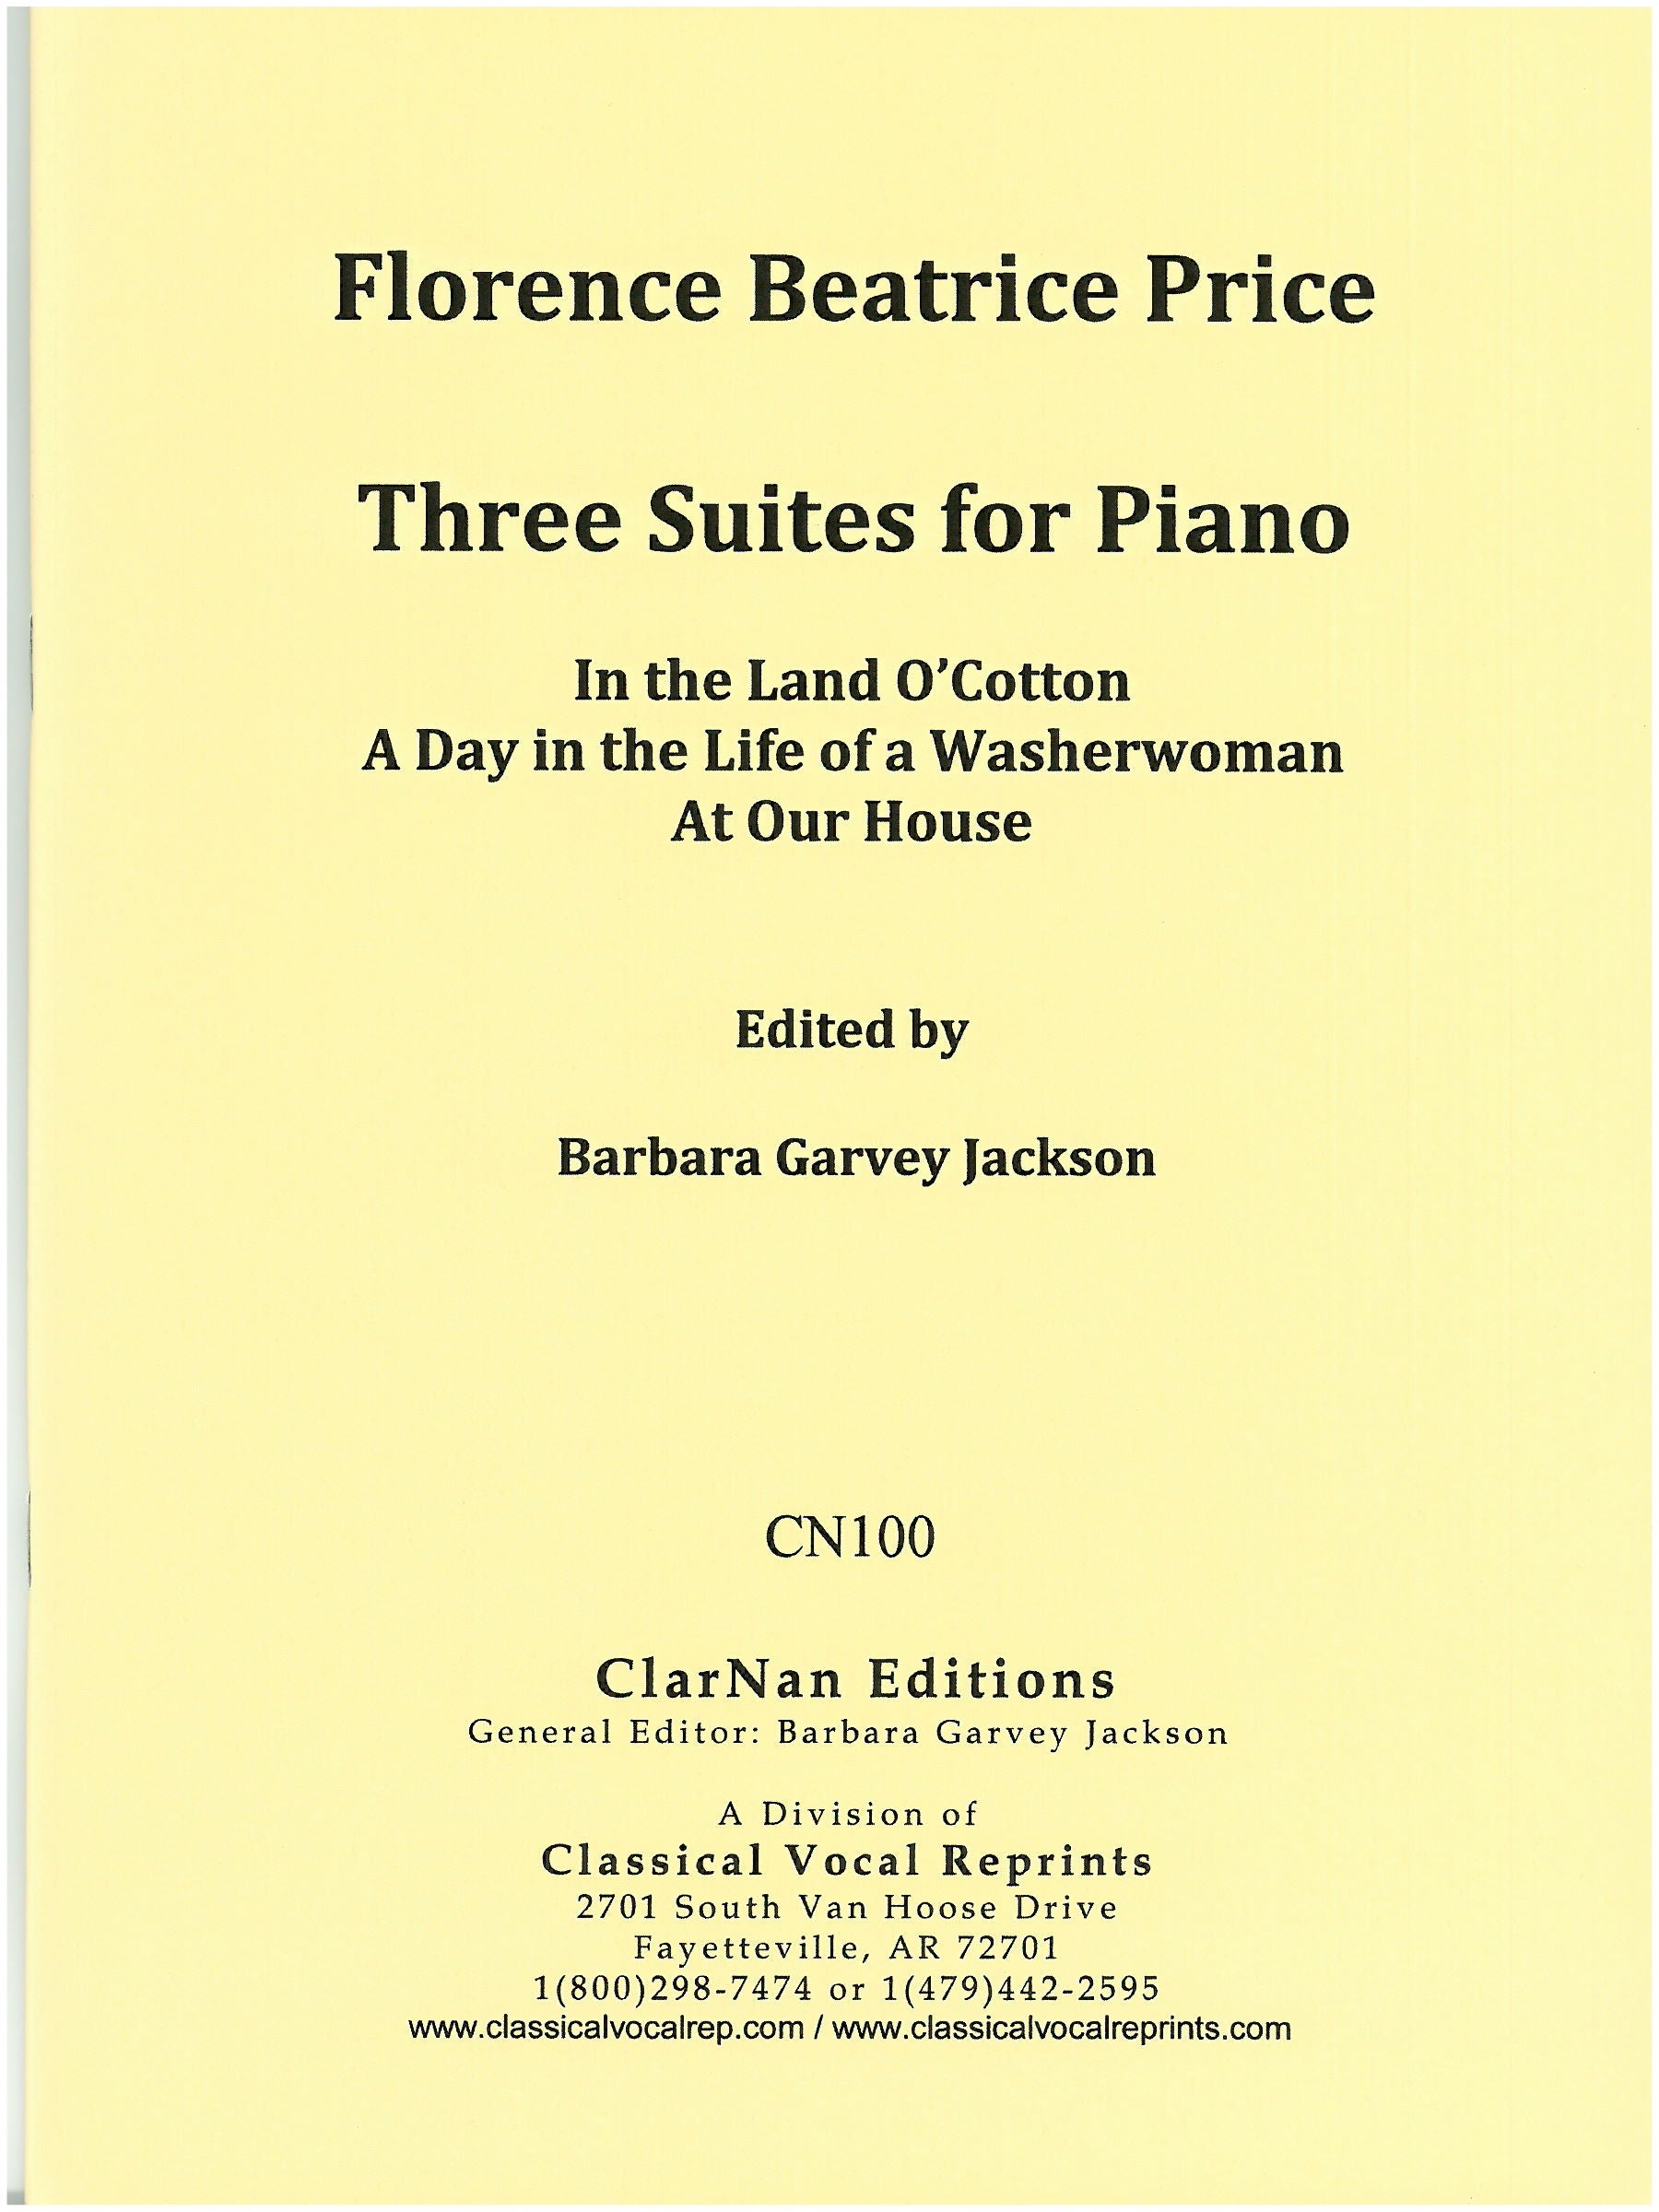 Price: 3 Suites for Piano